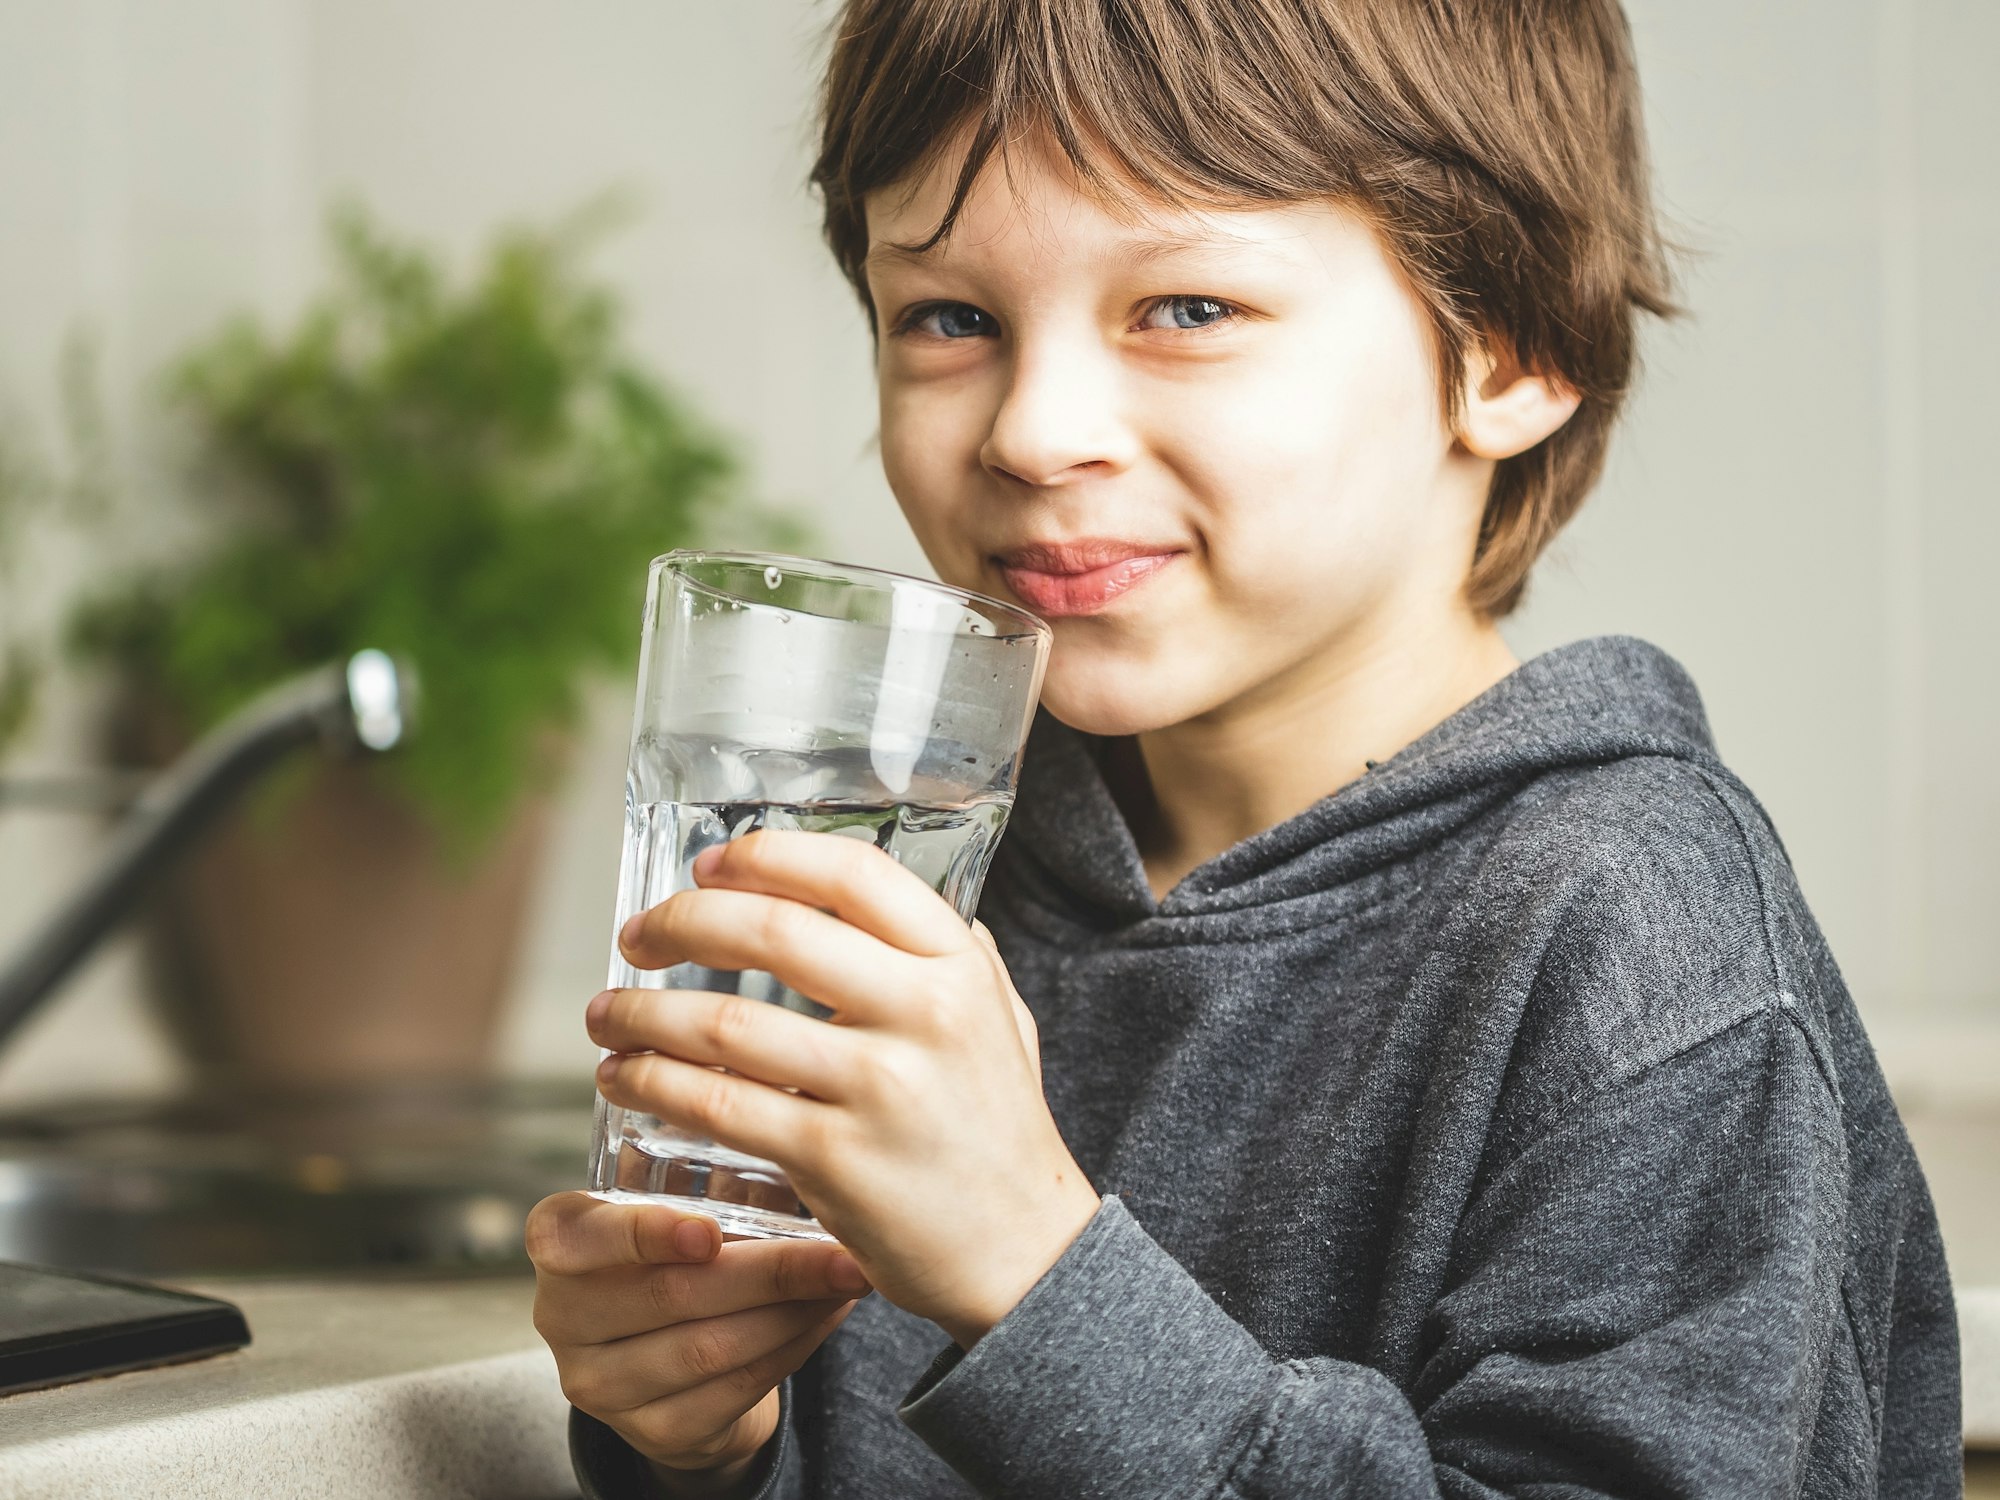 Little boy drinking water. Hydration helps the body function so it is part of a pre-memorization technique.